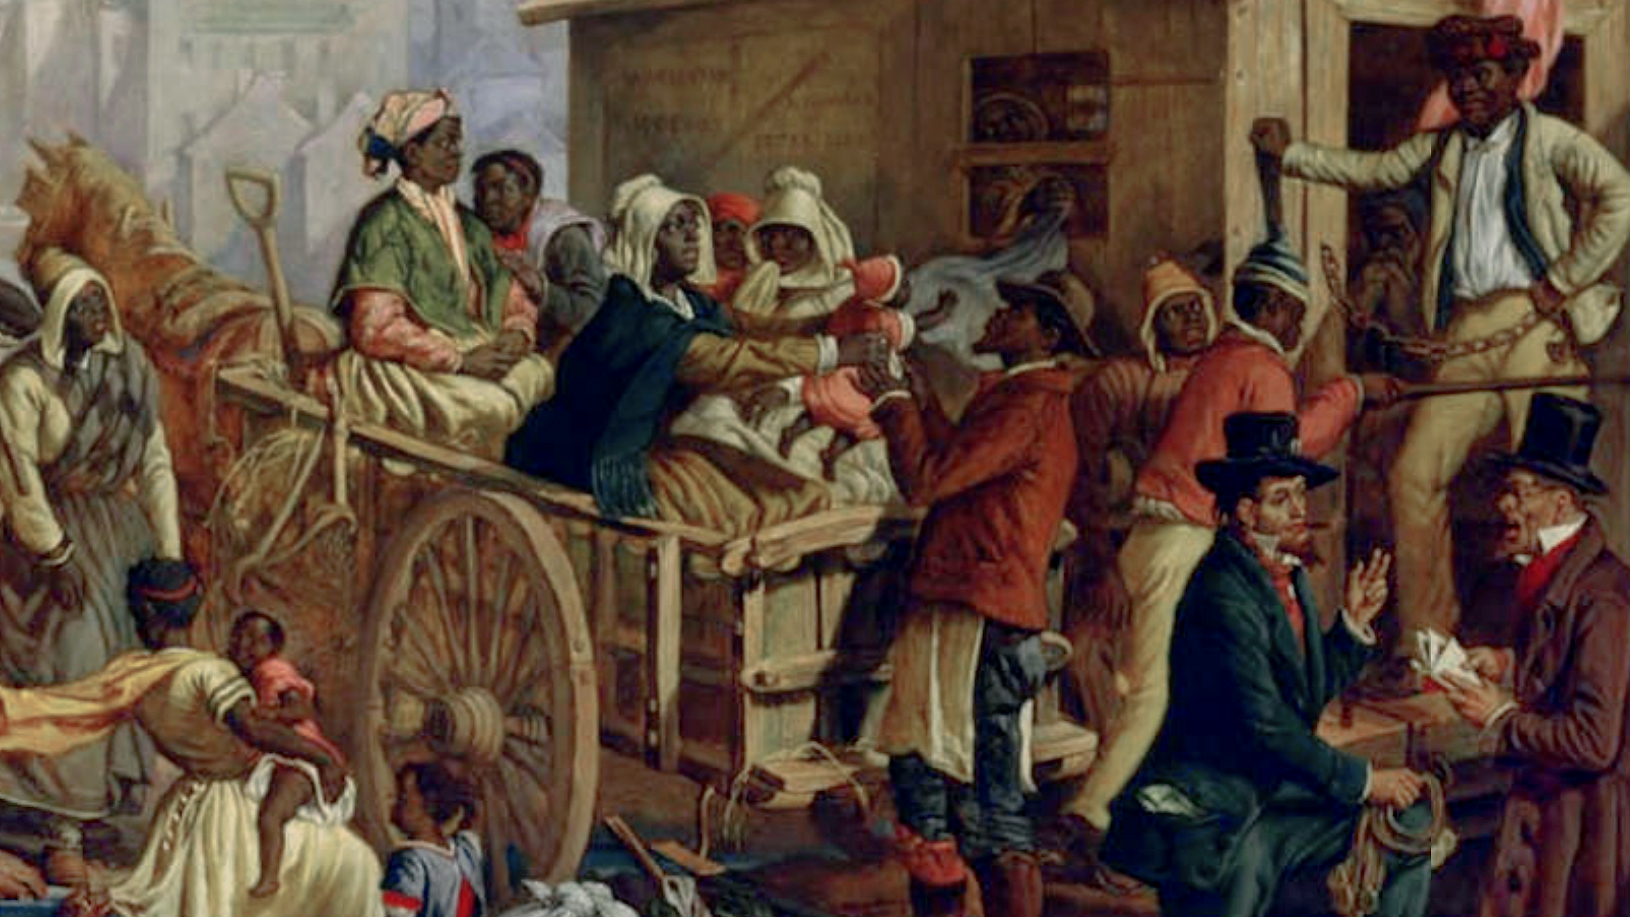 Eyre Crowe, After the Sale: Slaves Going South from Richmond (detail), 1853, oil on canvas, 27 x 36 inches (Chicago History Museum)